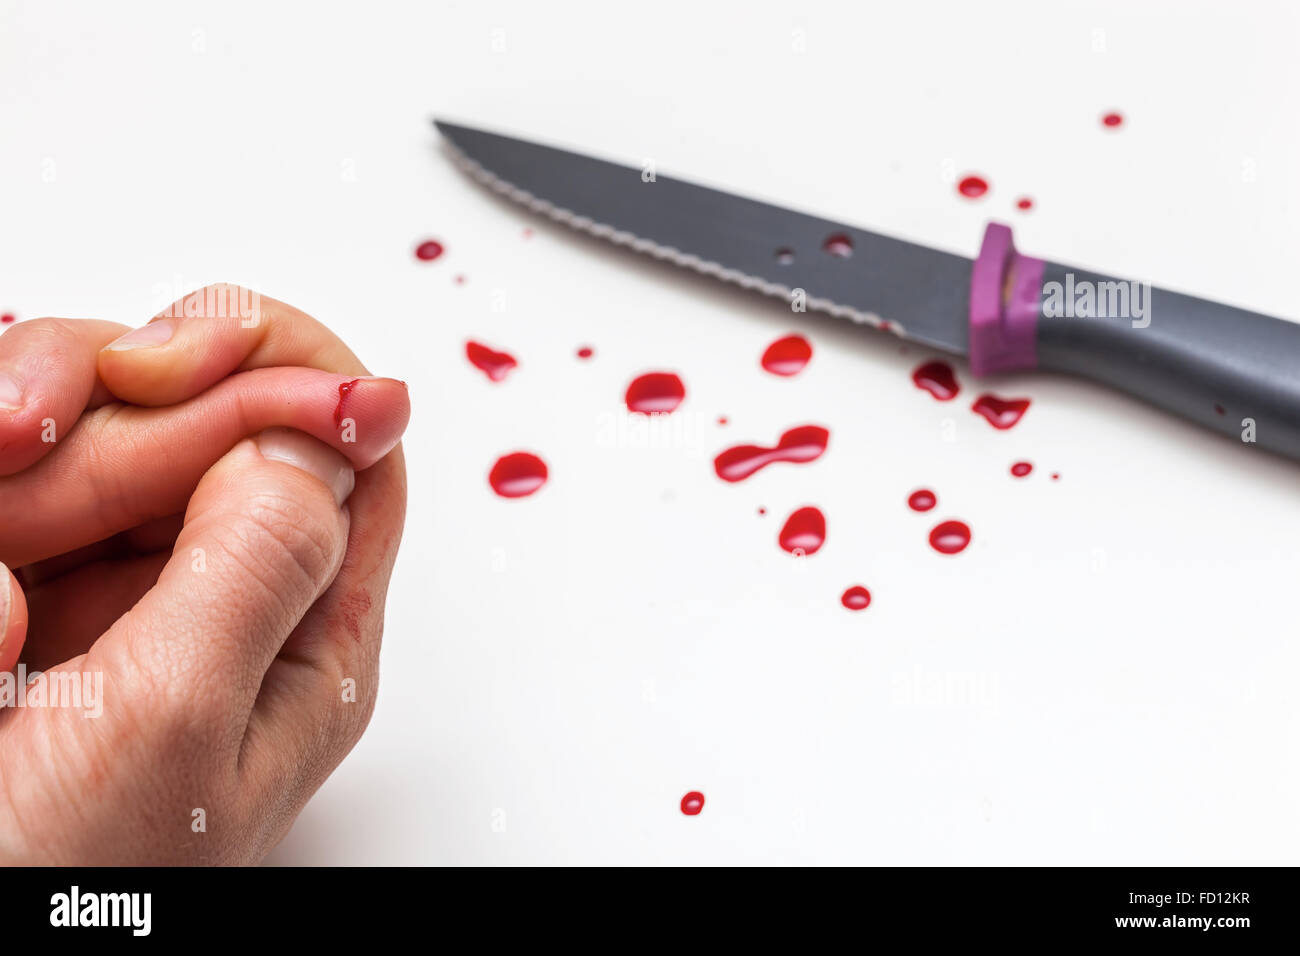 Hand, knife and drops of blood on a white surface Stock Photo